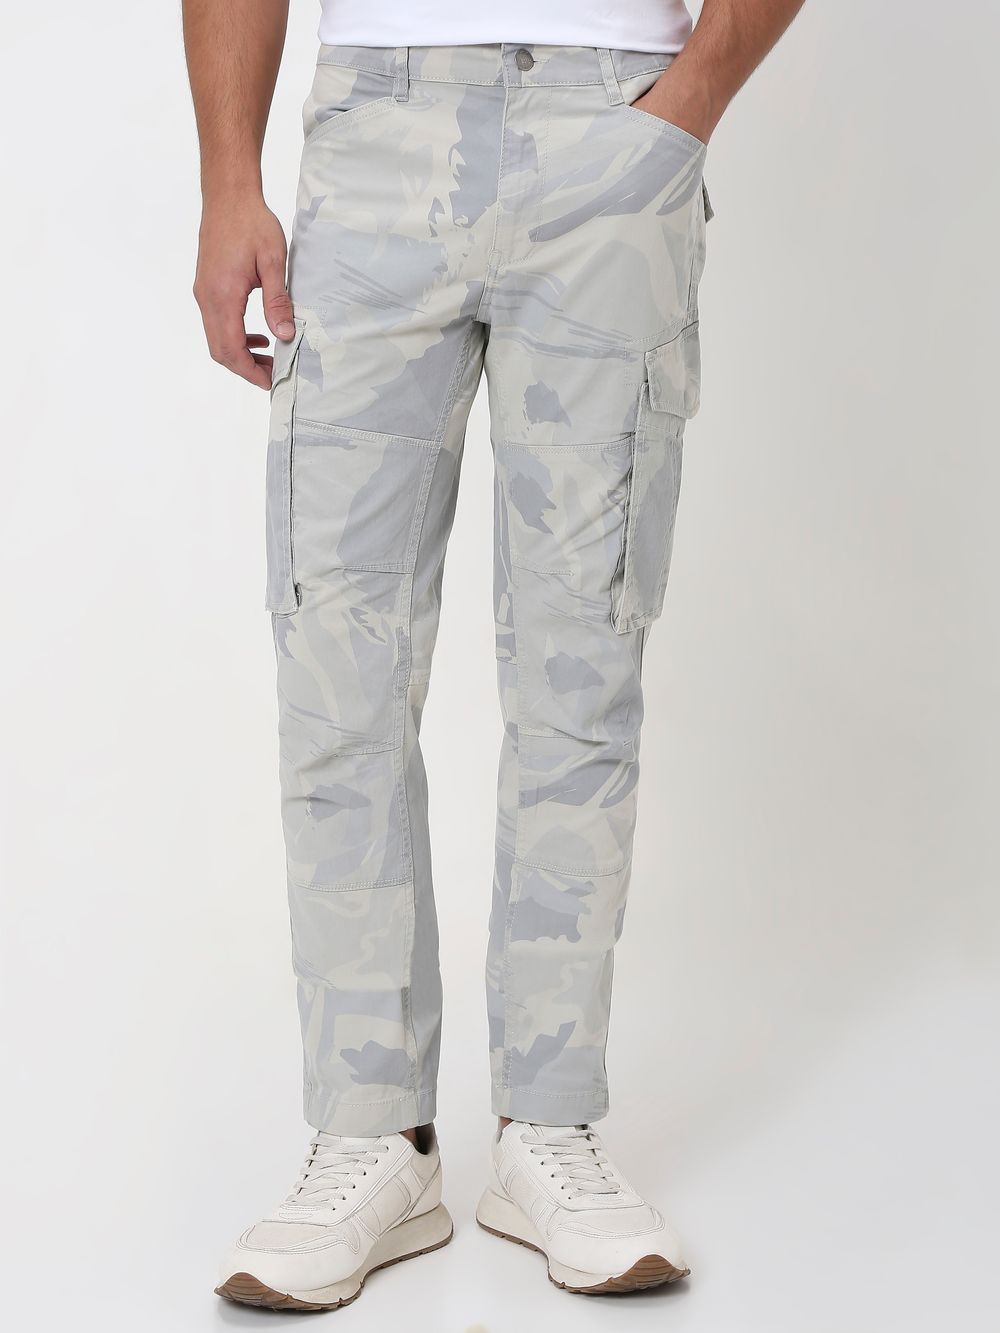 Mens Cargo Pant - Shop Cargo Style Trousers for Men